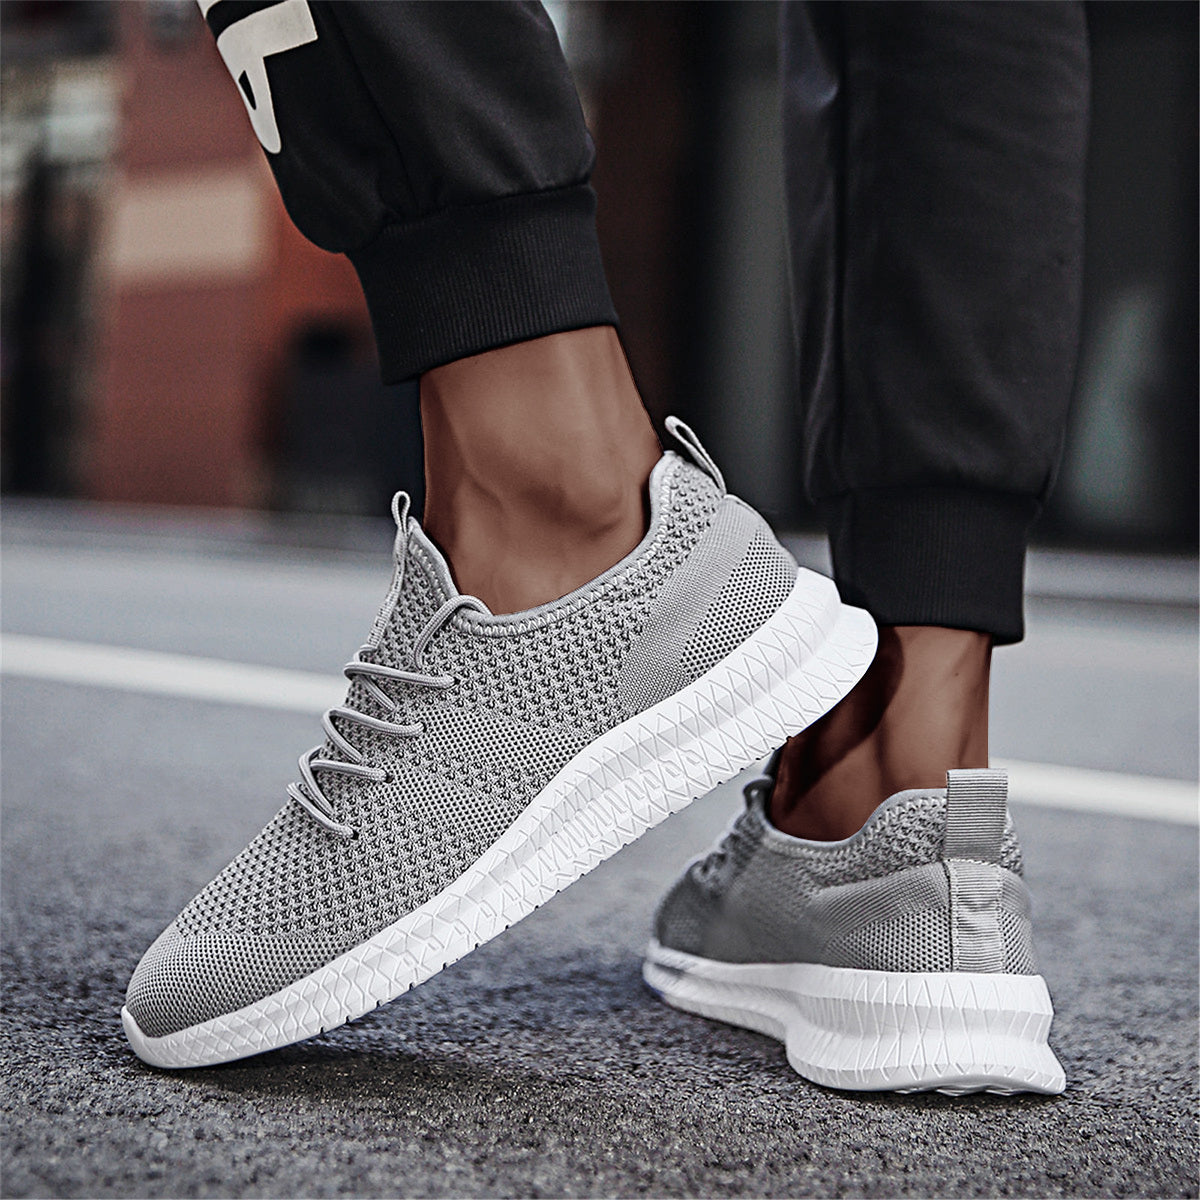 Men's Knit Breathable Comfortable Mesh Athletic Shoes For Running Tennis Walking